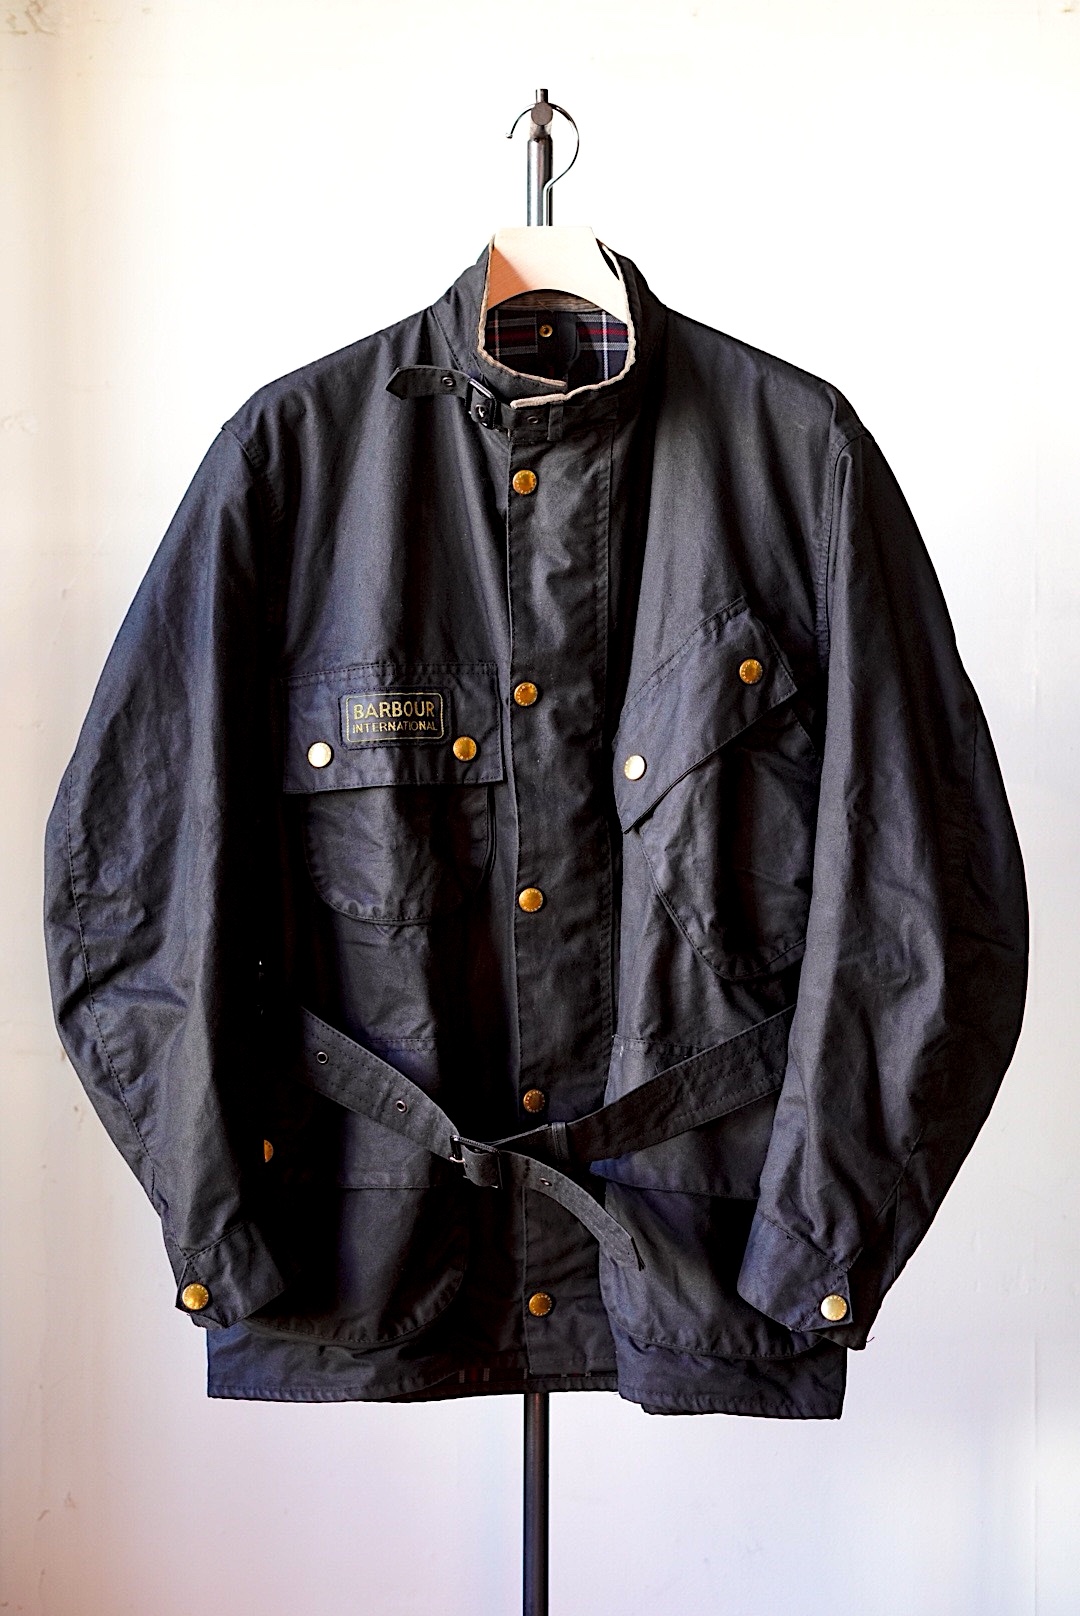 Barbour Vintage バブアーヴィンテージ商品一覧 通販 - ARCH ONLINE SHOP